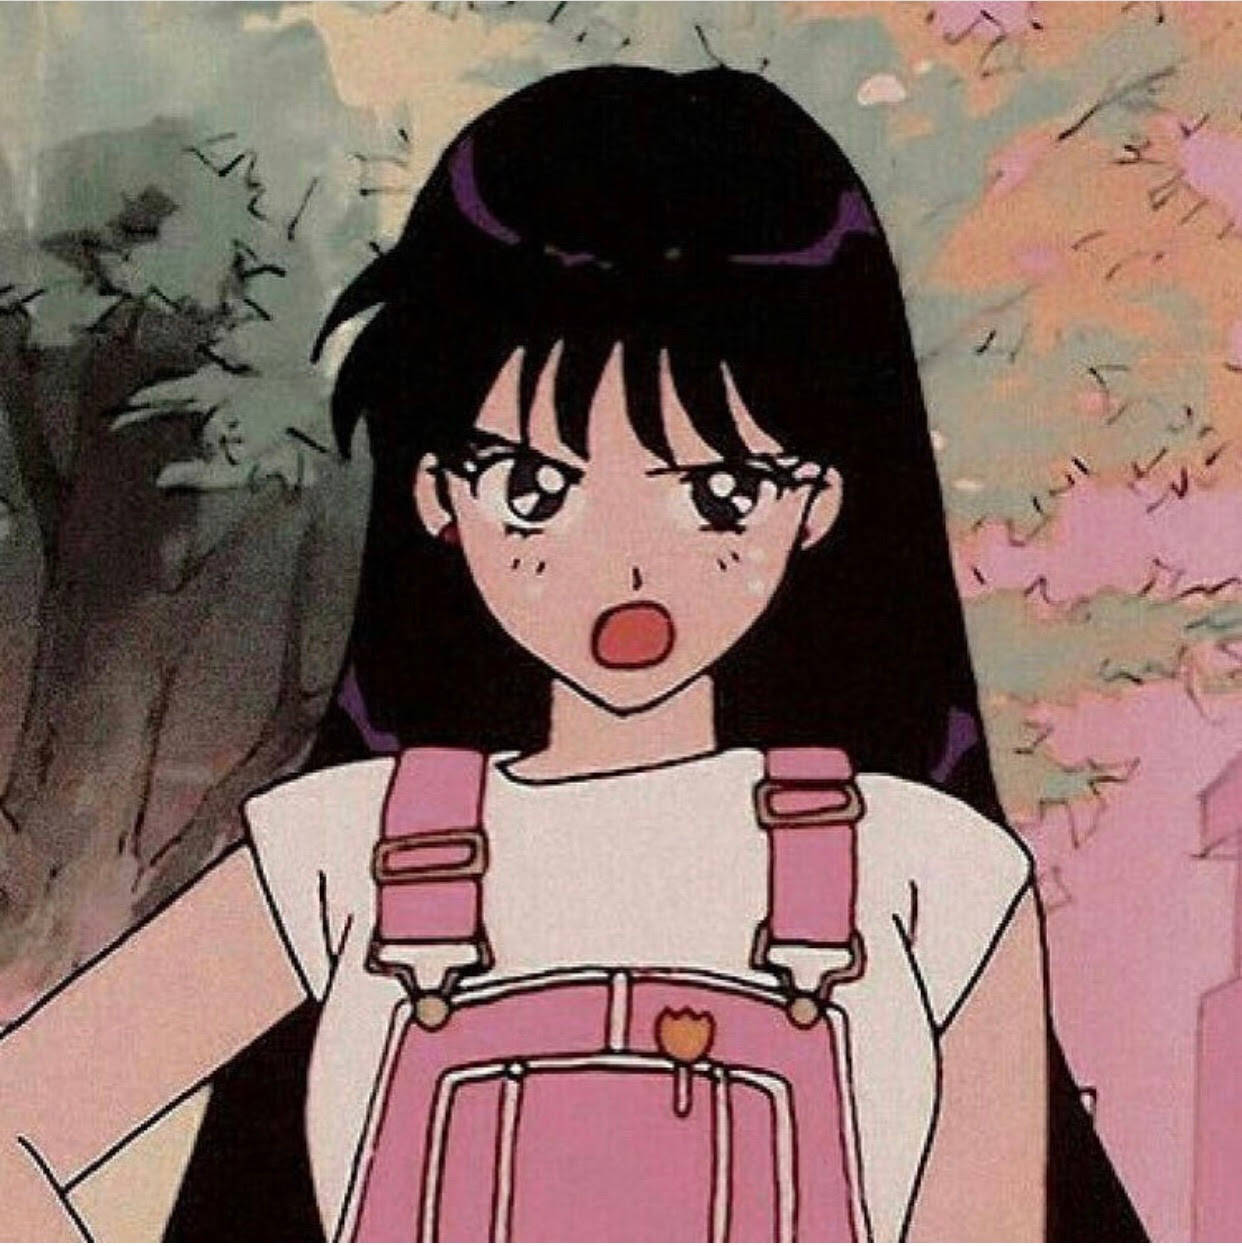 Cute Aesthetic Profile Pictures Of Anime Character Sailor Mars Against Trees Backdrop From Sailor Moon Anime Series